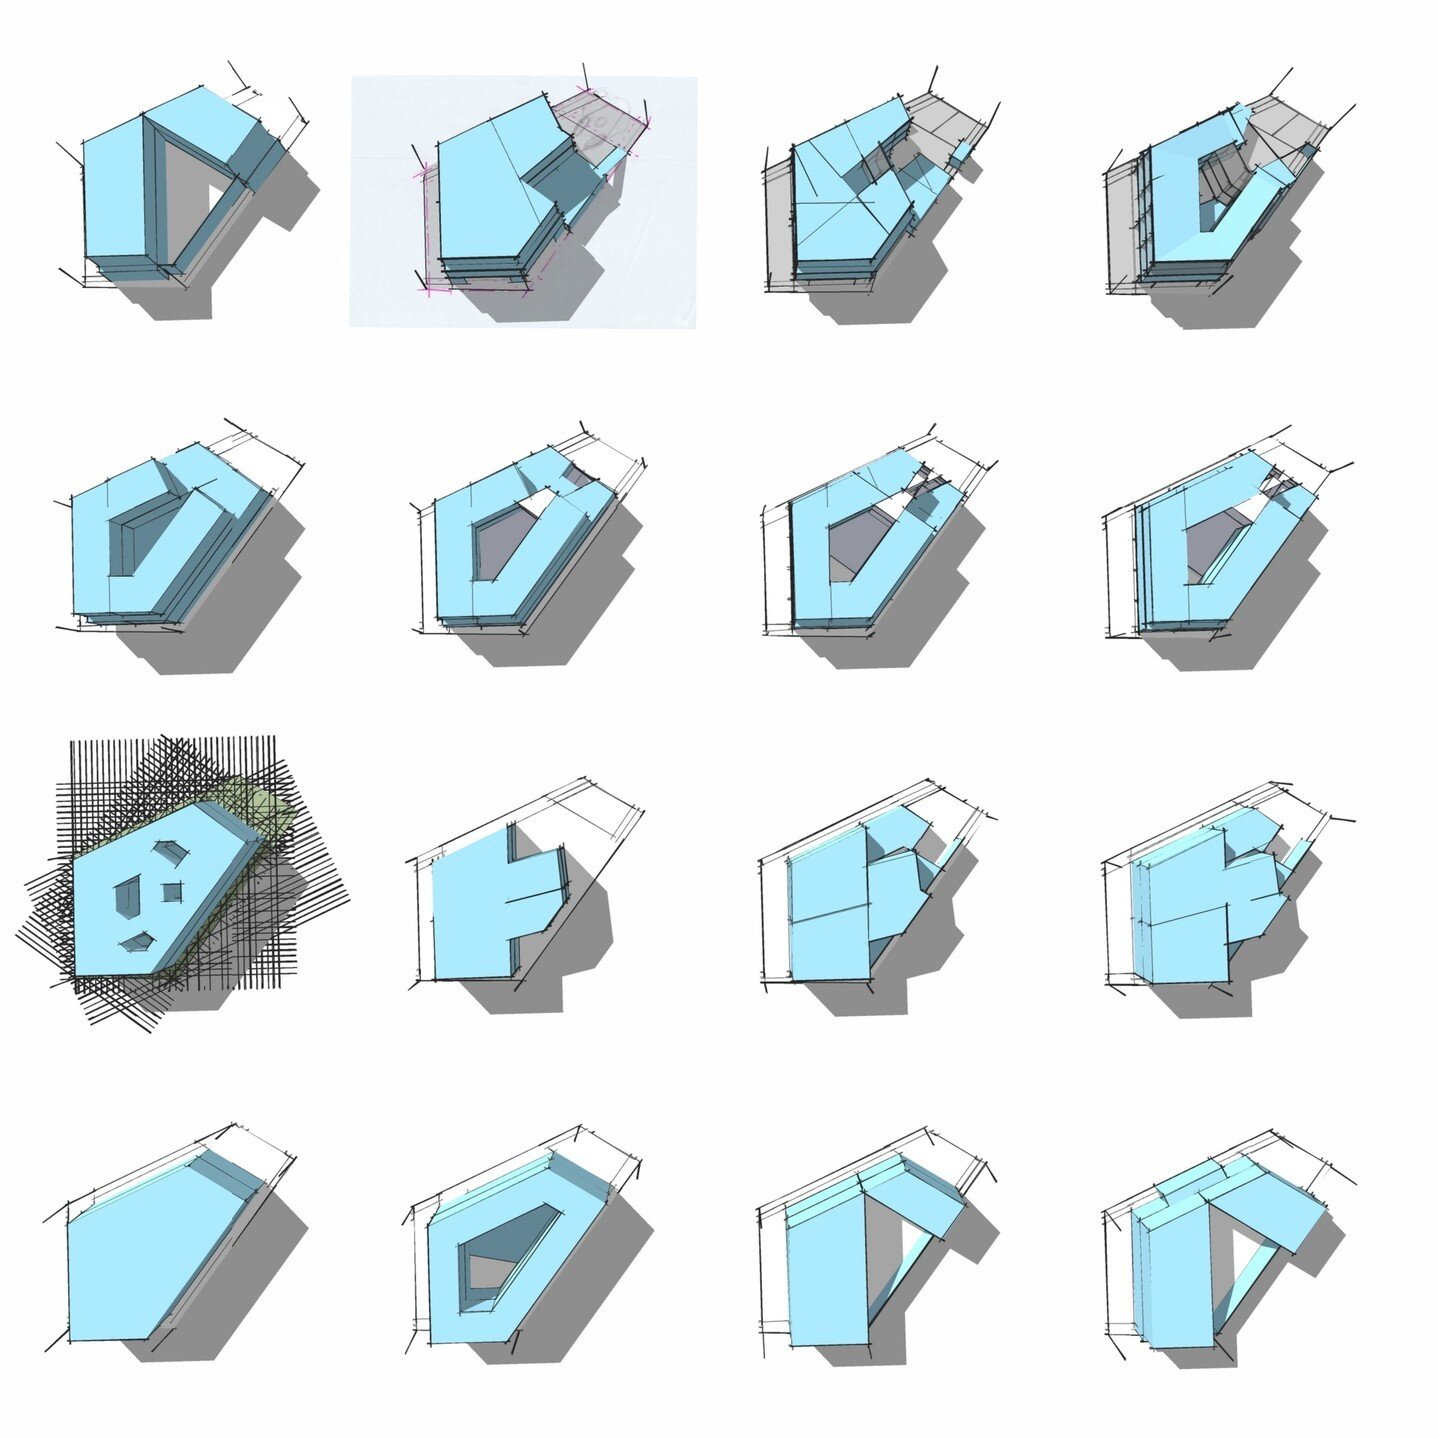 Work in Progress - Adelaide, Australia _ A random selection of some very early massing models for a new multi-unit residential development. These diagrammatic models are exploring the capacity and configuration of the site. #qoca #qocatecture #archit